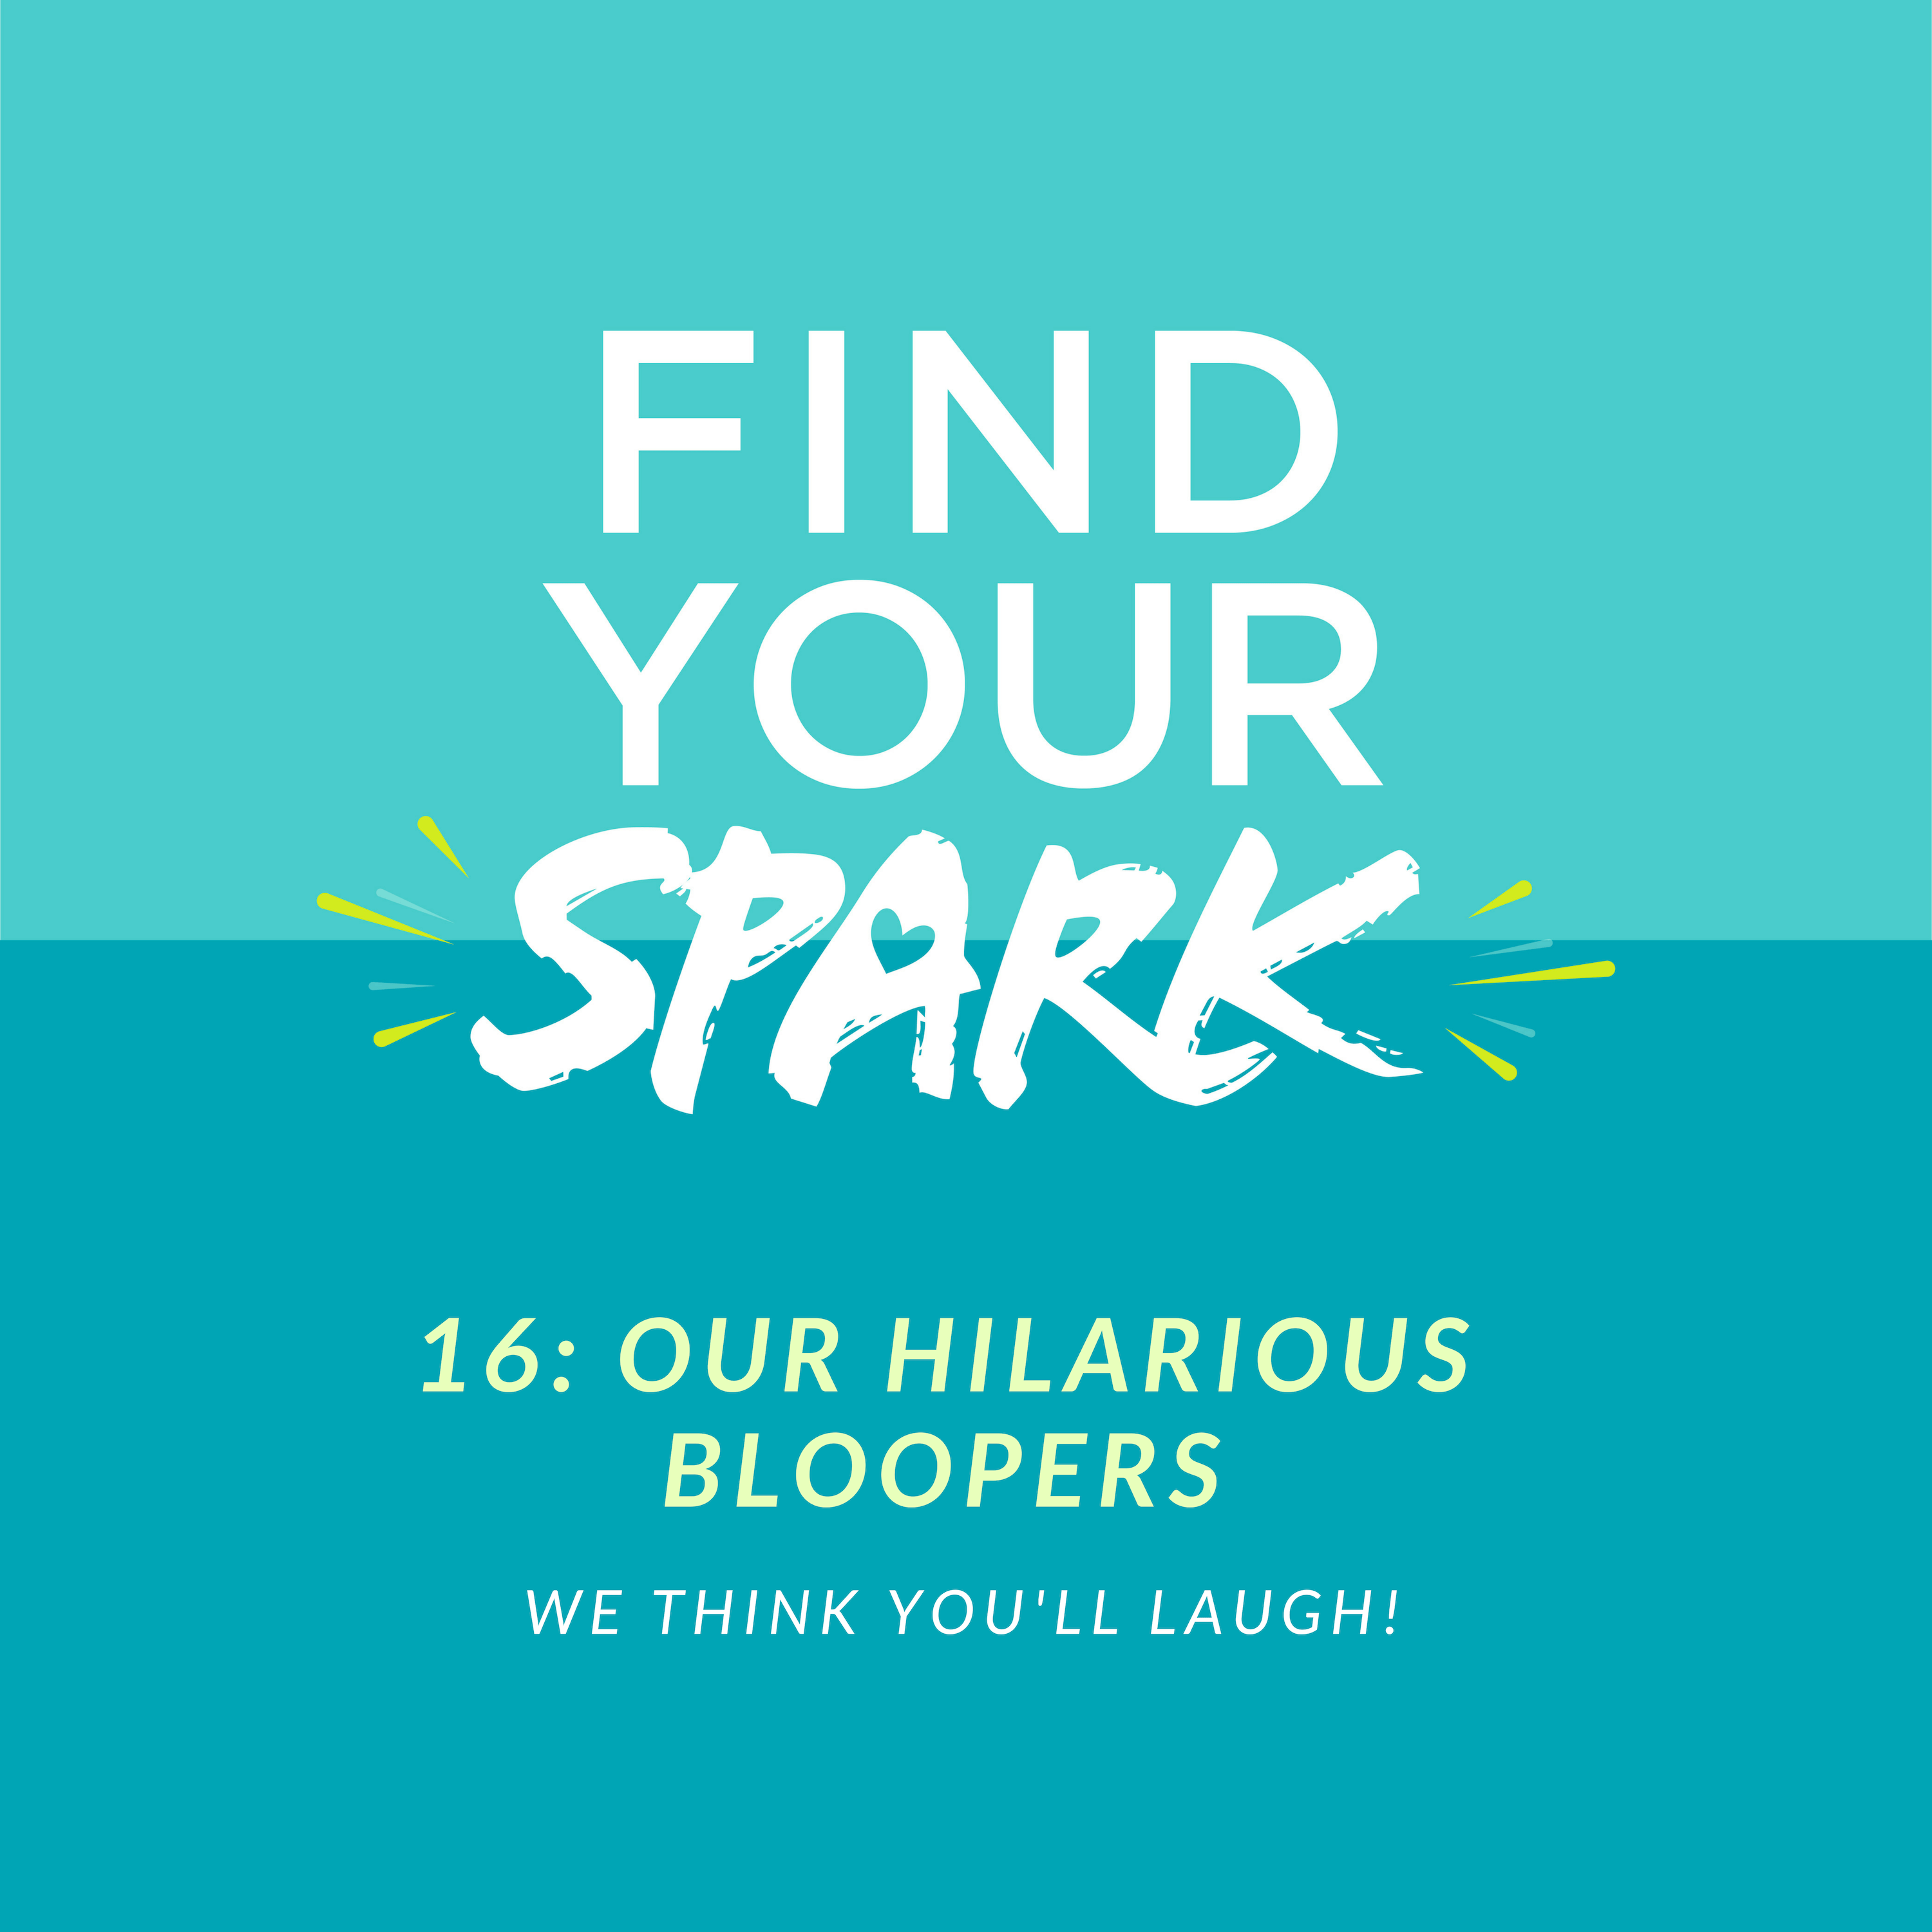 Our Hilarious Bloopers - The SPARK Mentoring Program